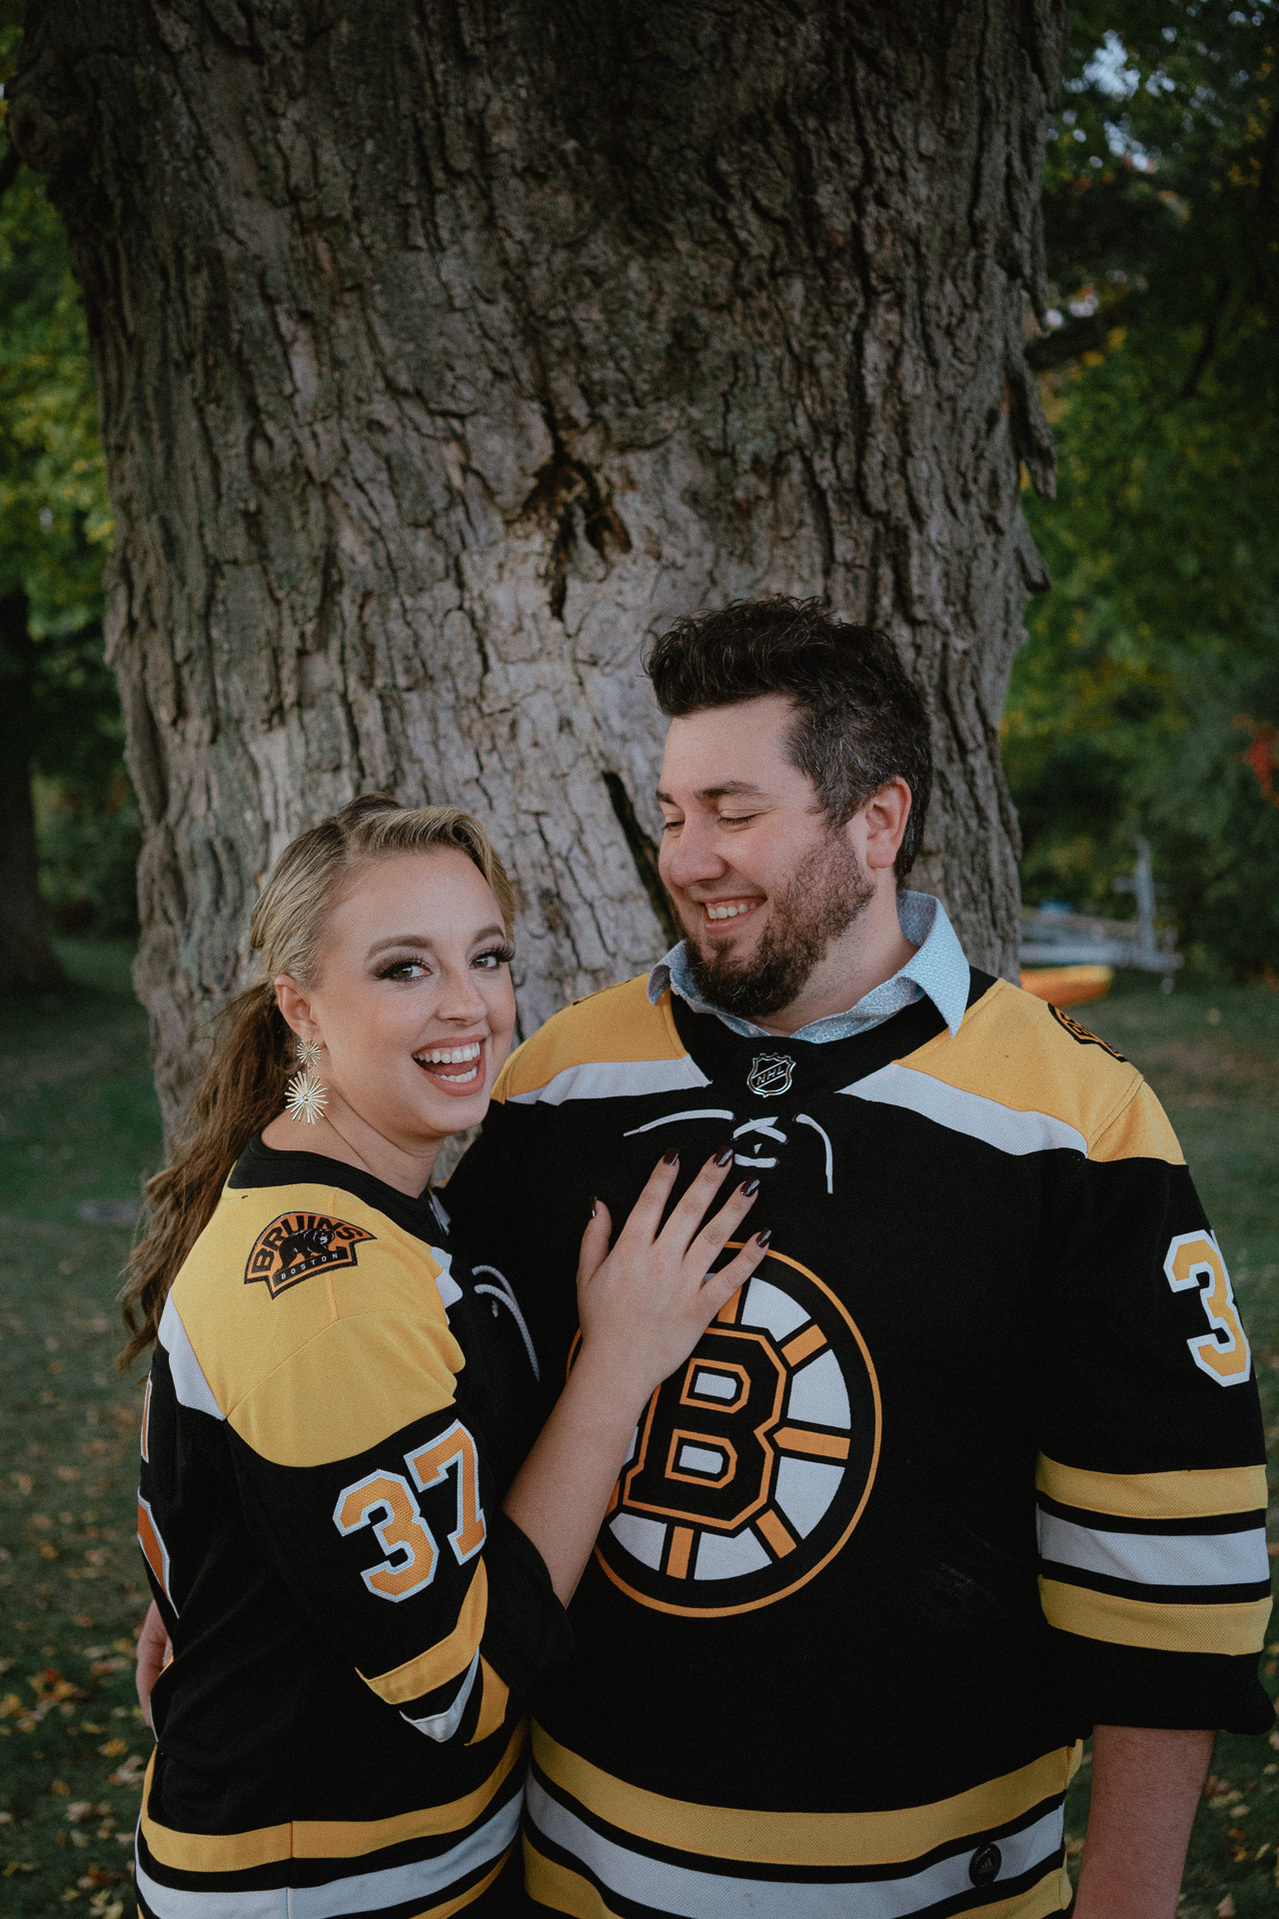 Bruins fans during engagement photography session.